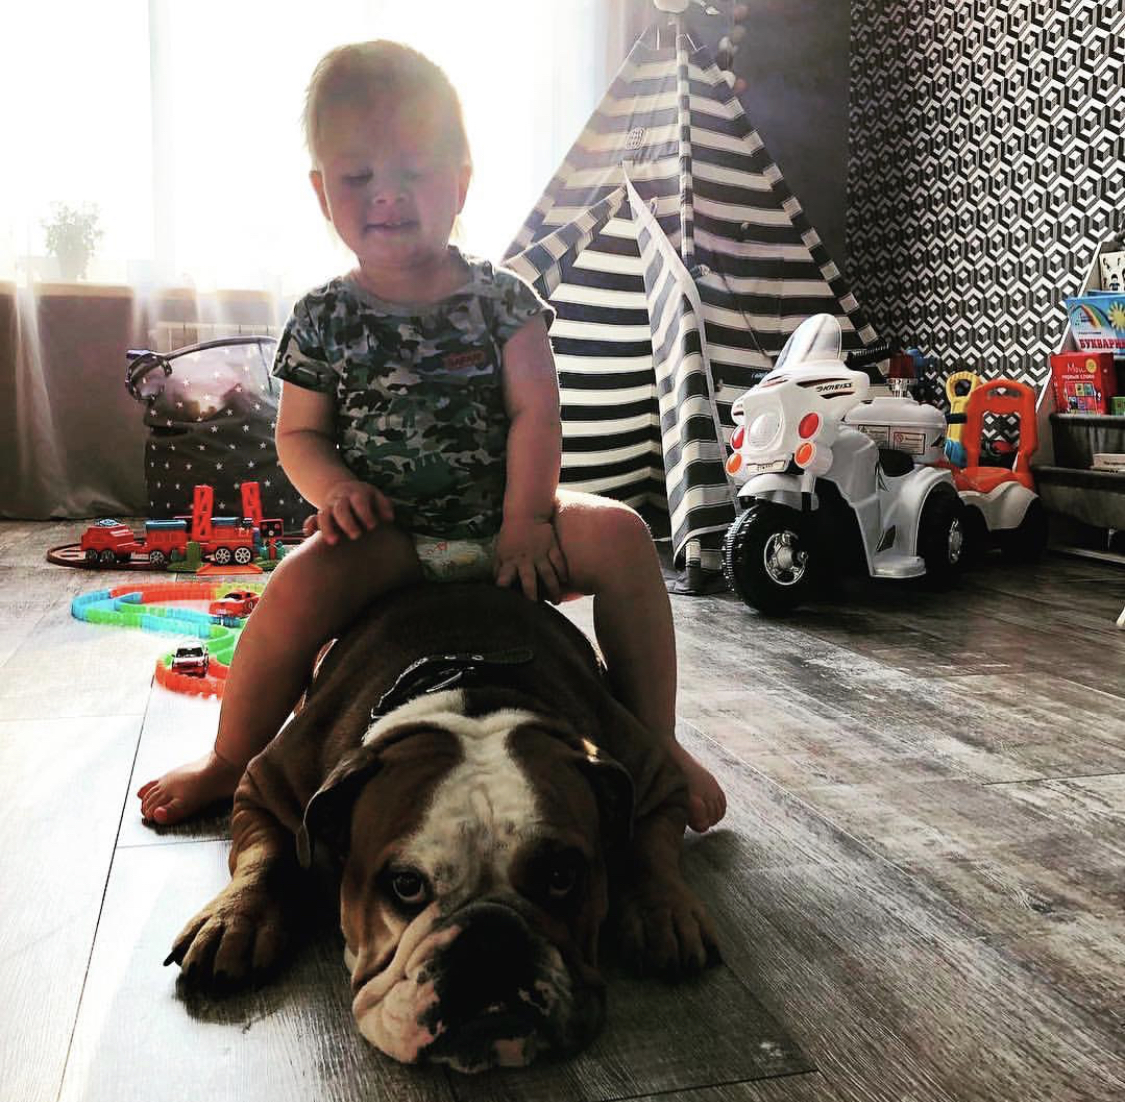 A toddler riding a English Bulldog lying down on the floor